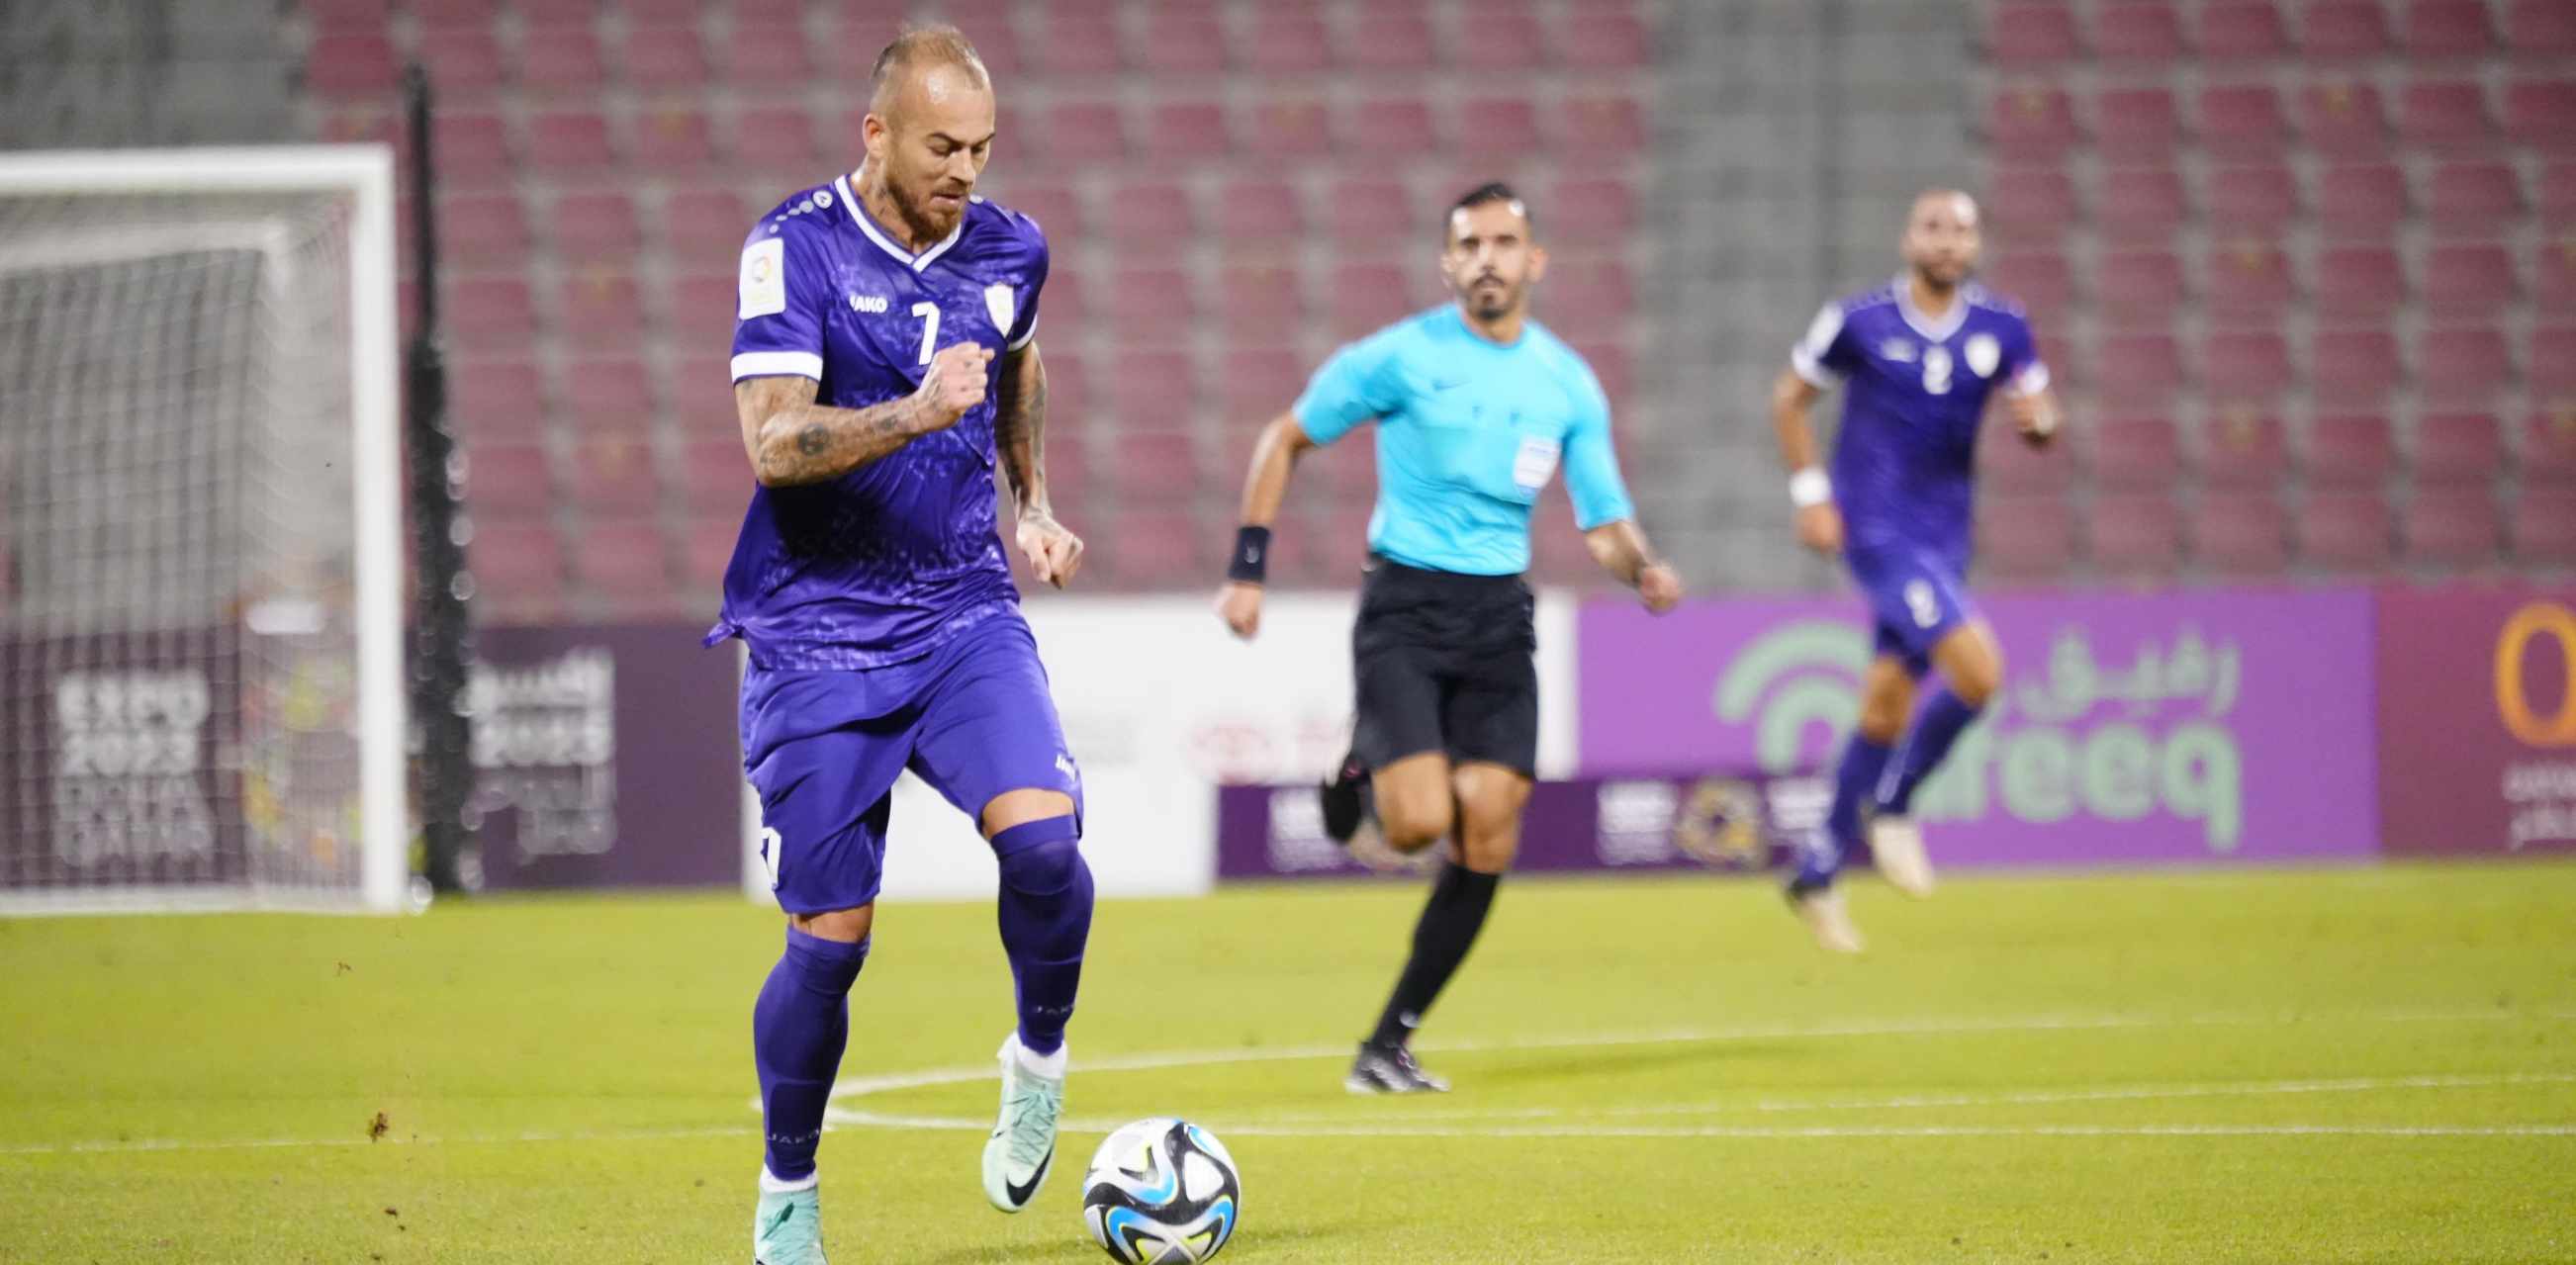 Our team loses to Qatar Club, making its survival mission difficult